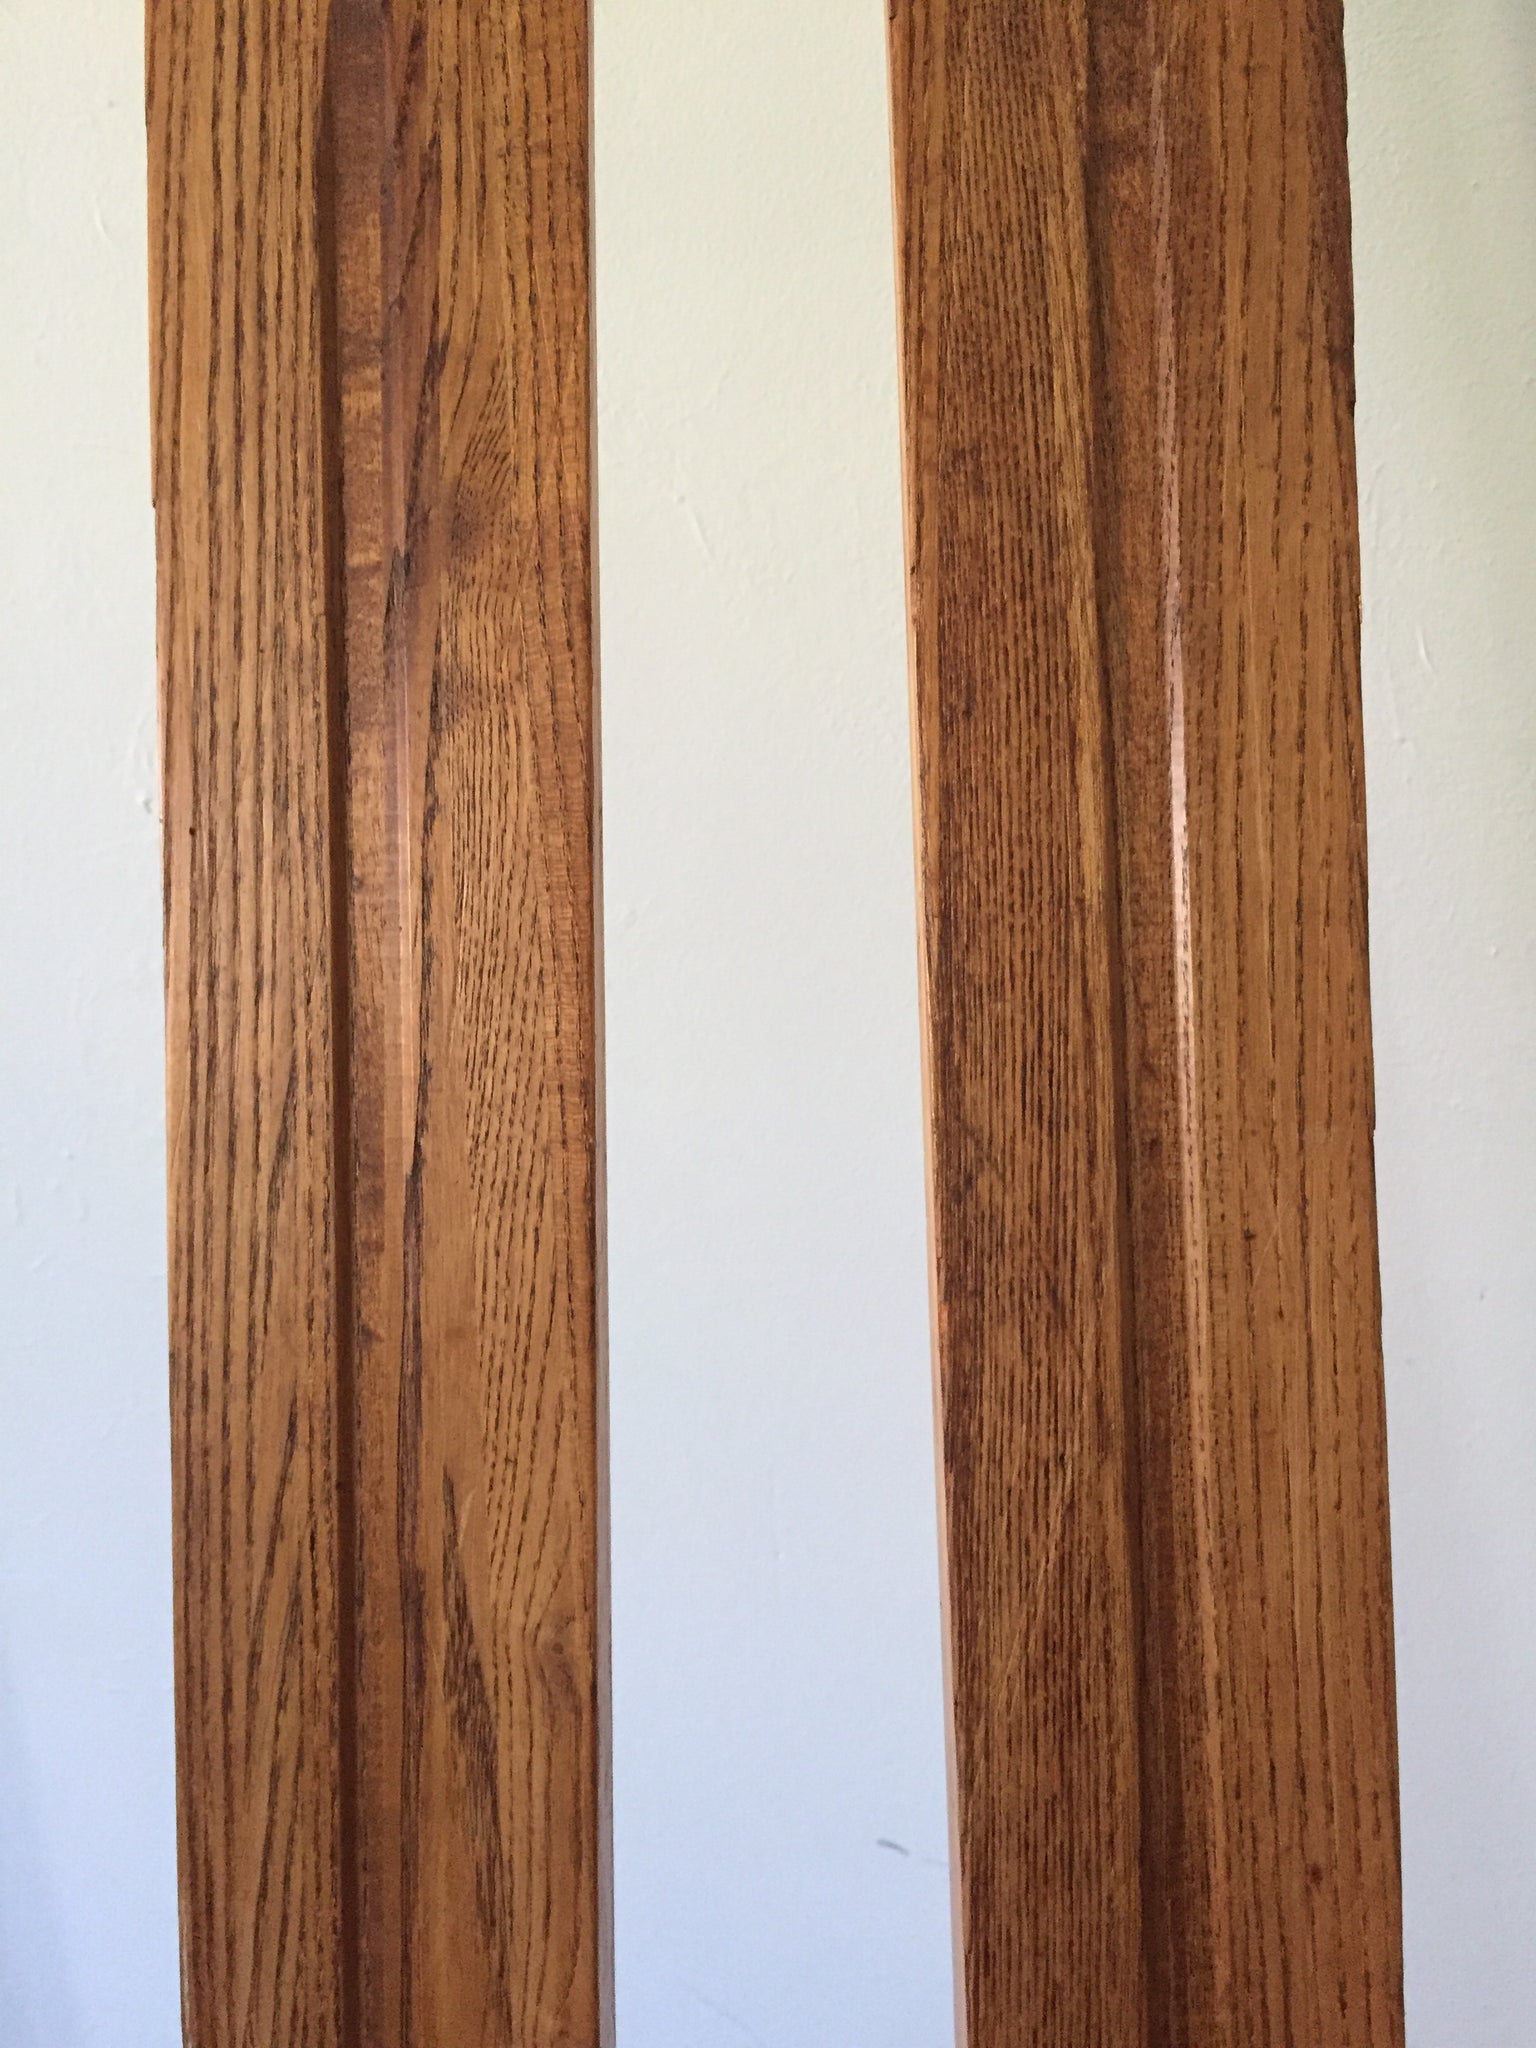 Vintage Collectible Danish Wooden Snow Skis